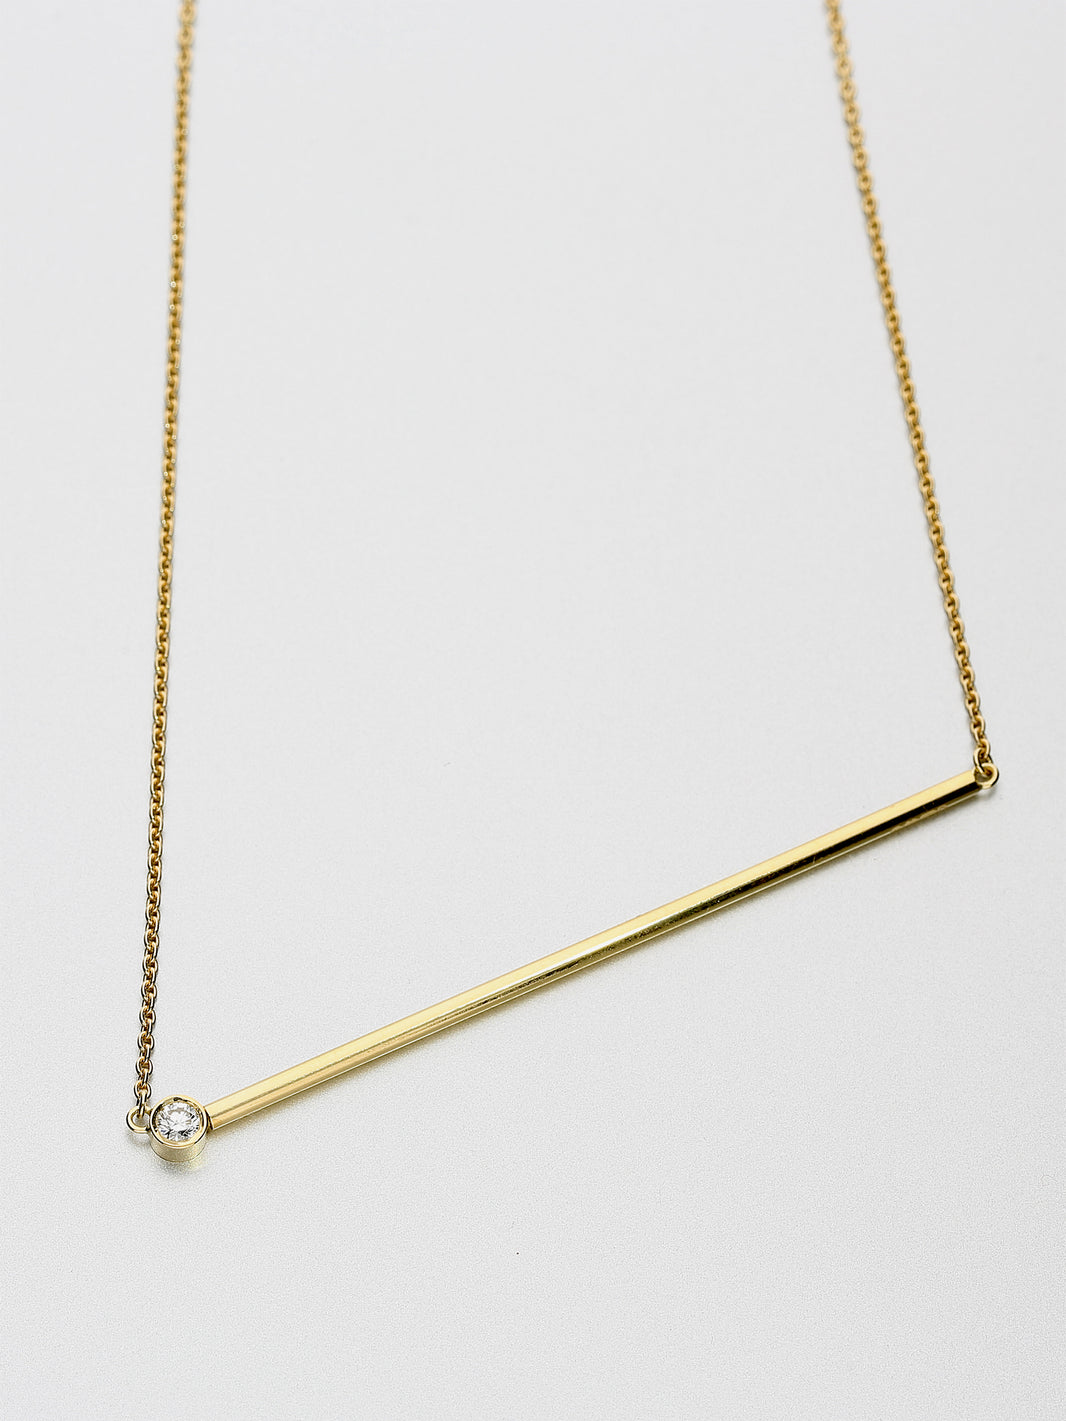 Abacus small brilliant diamond Necklace, Yellow gold